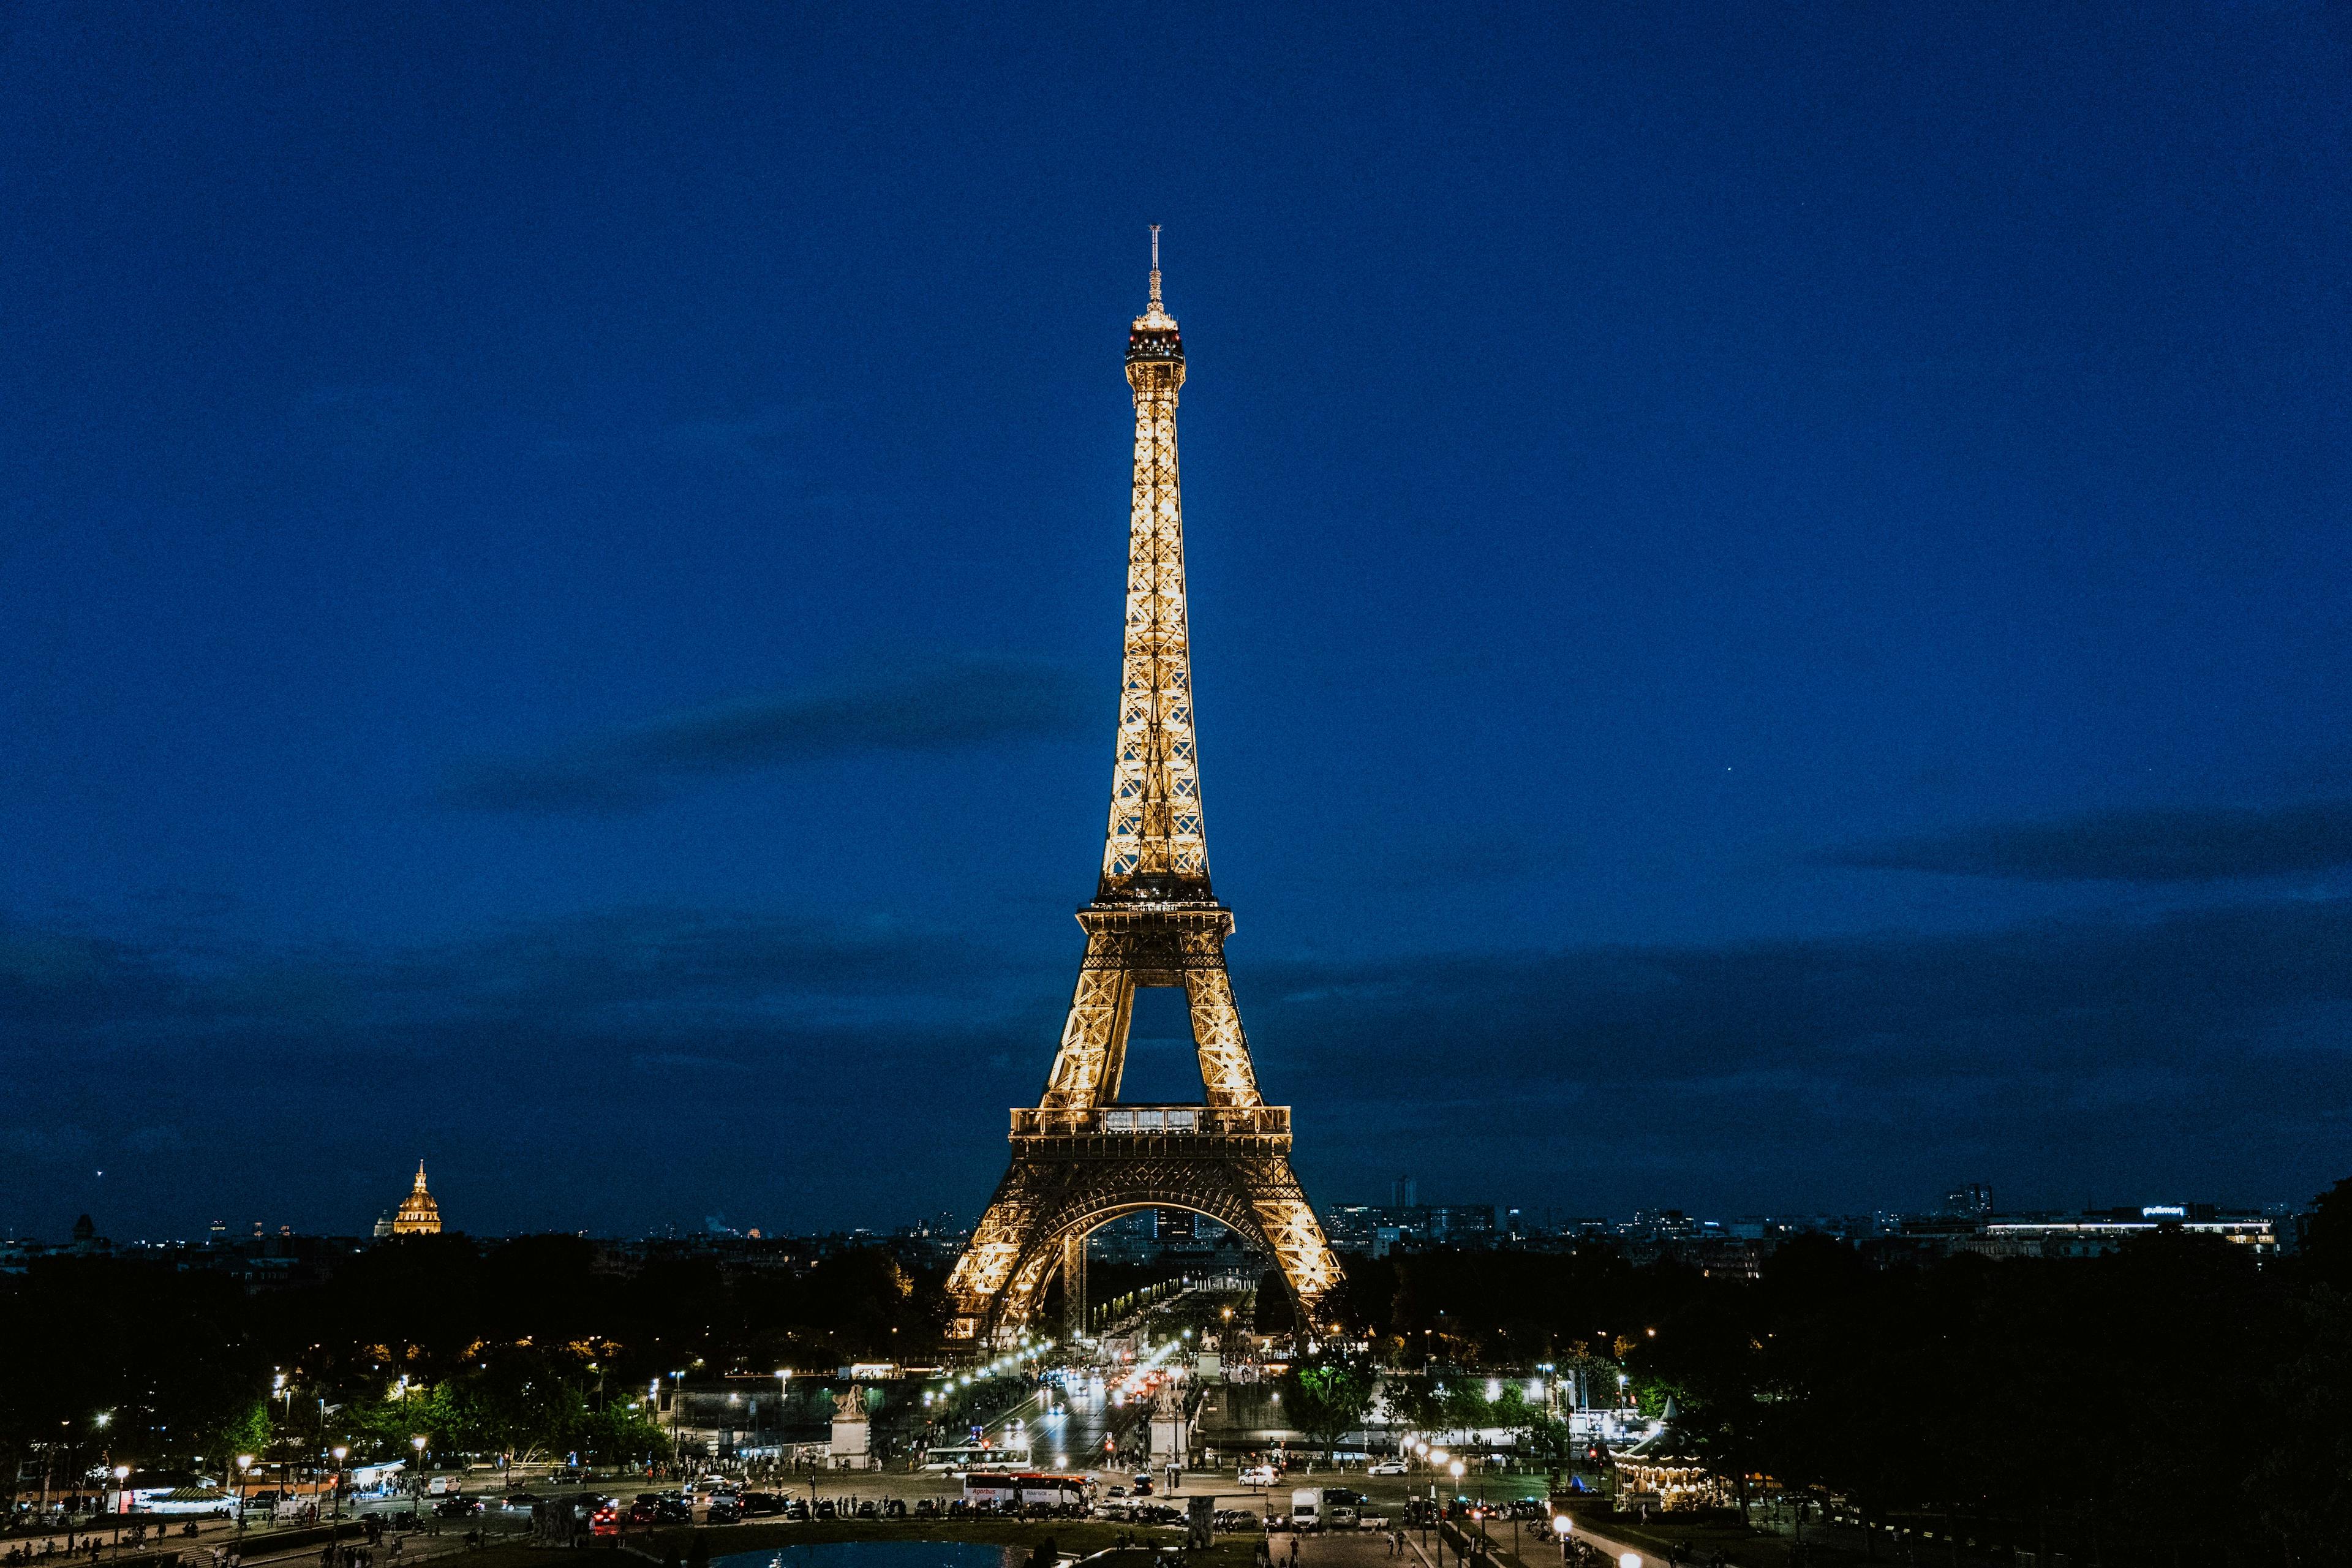 Eiffel Tower during night in Paris France